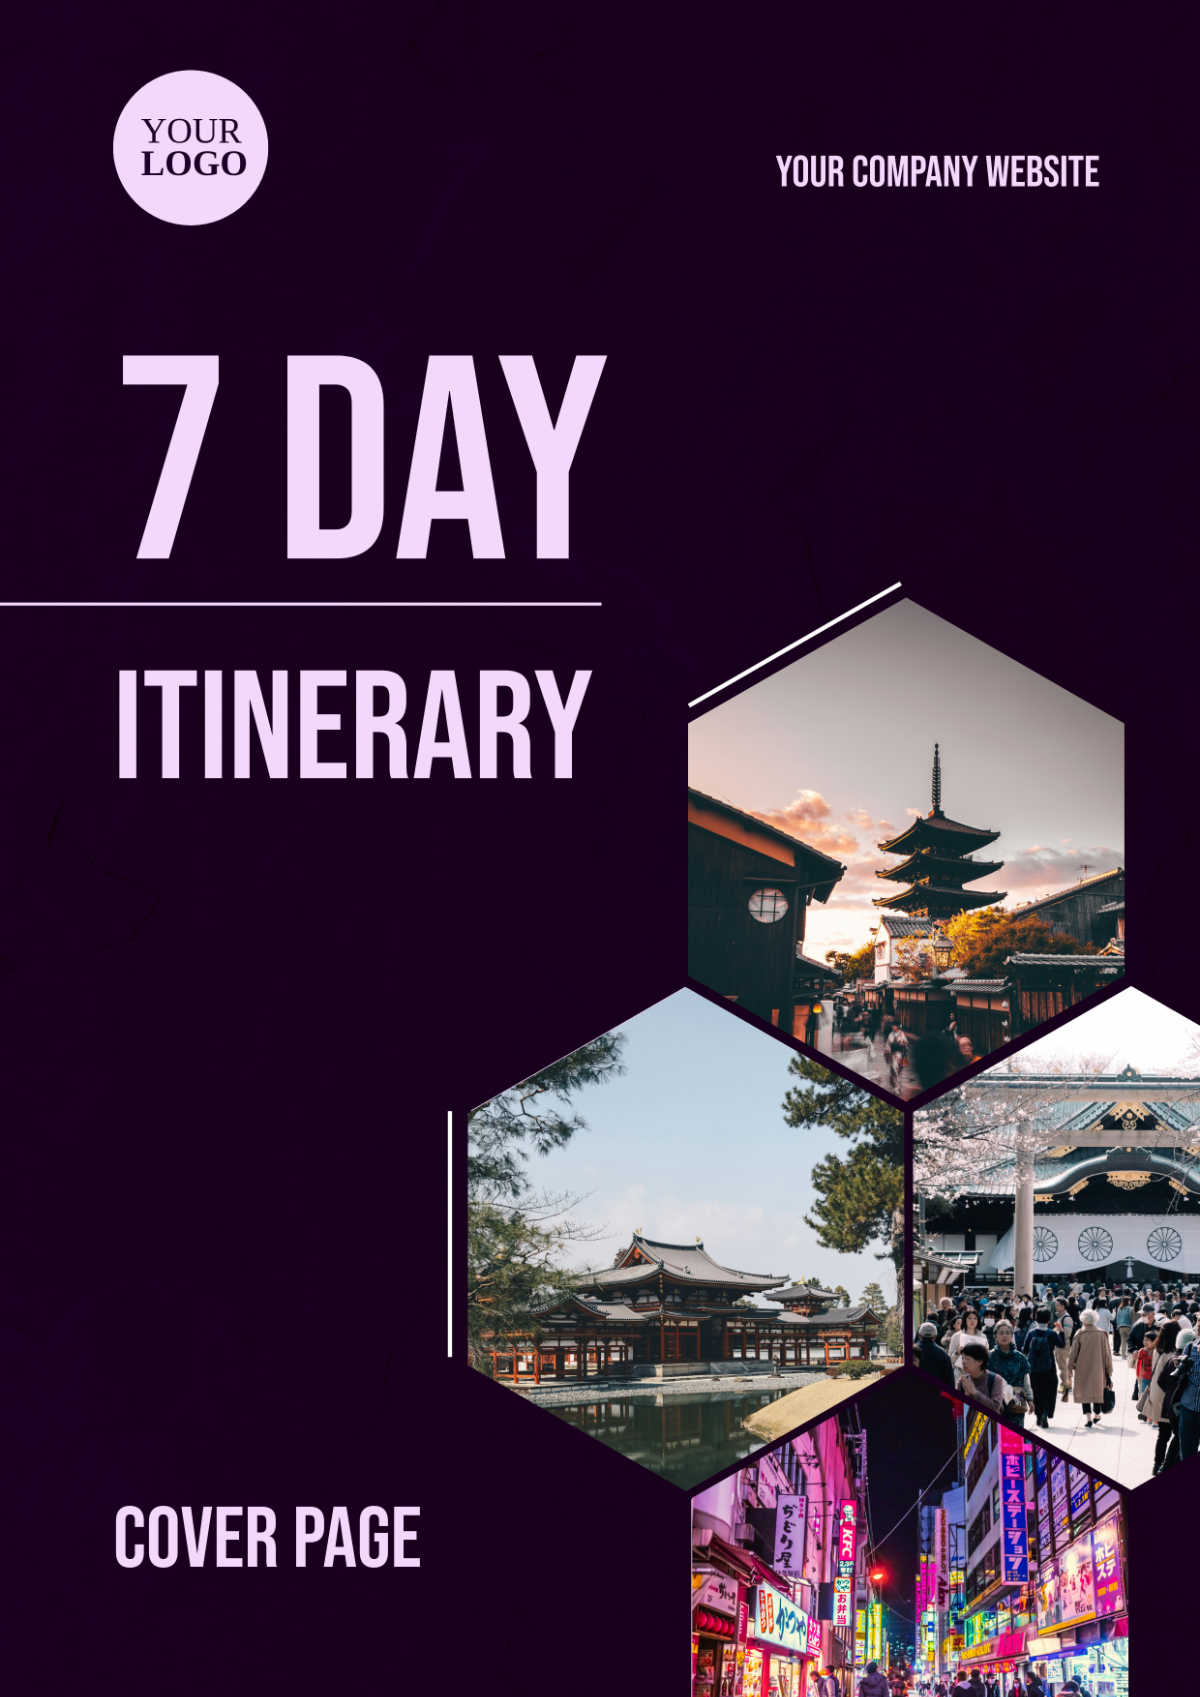 Free 7 Day Itinerary Cover Page Template